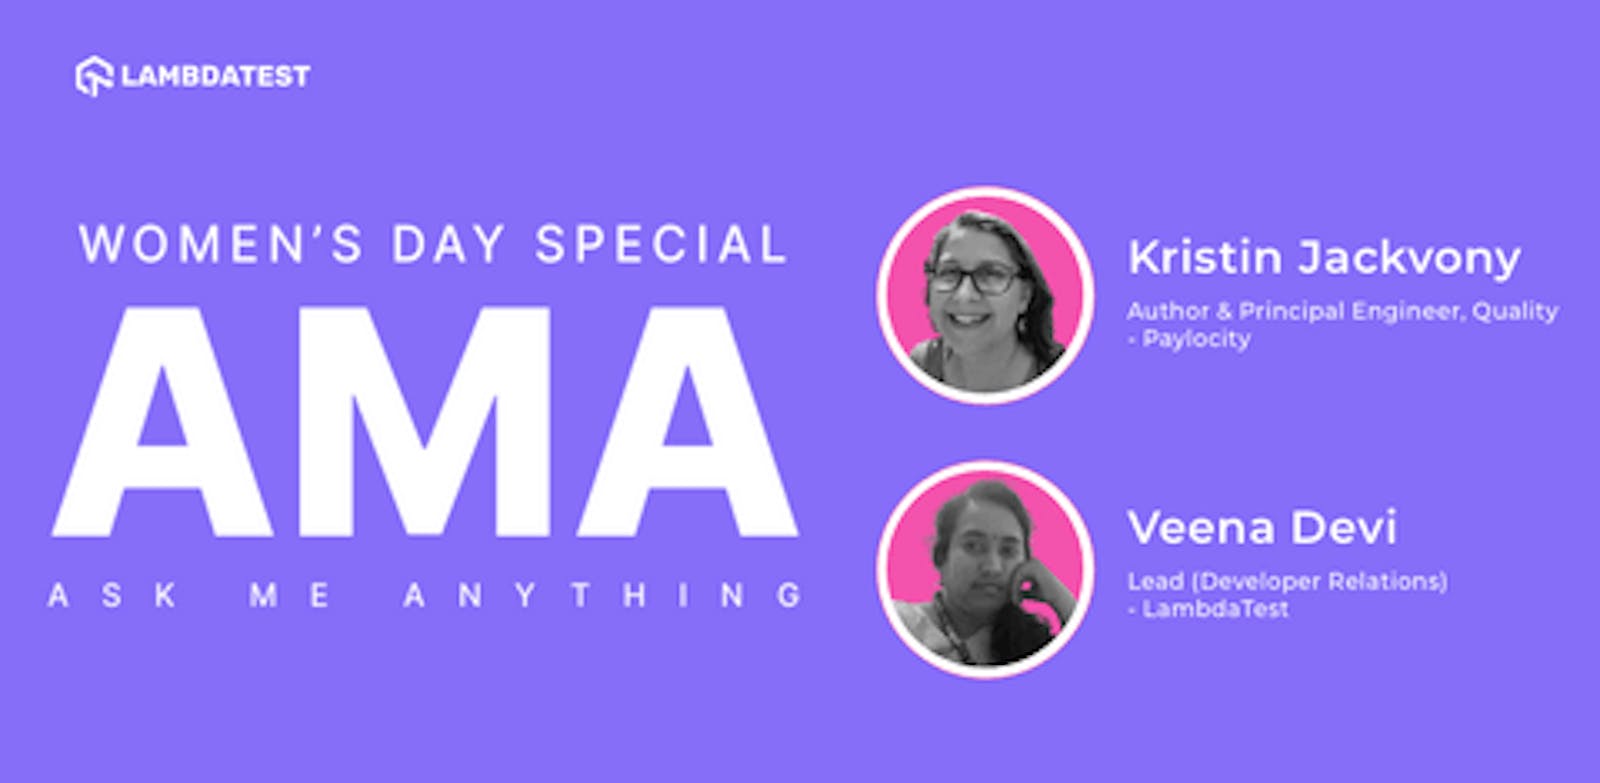 Women's Day Special - AMA (Ask Me Anything)